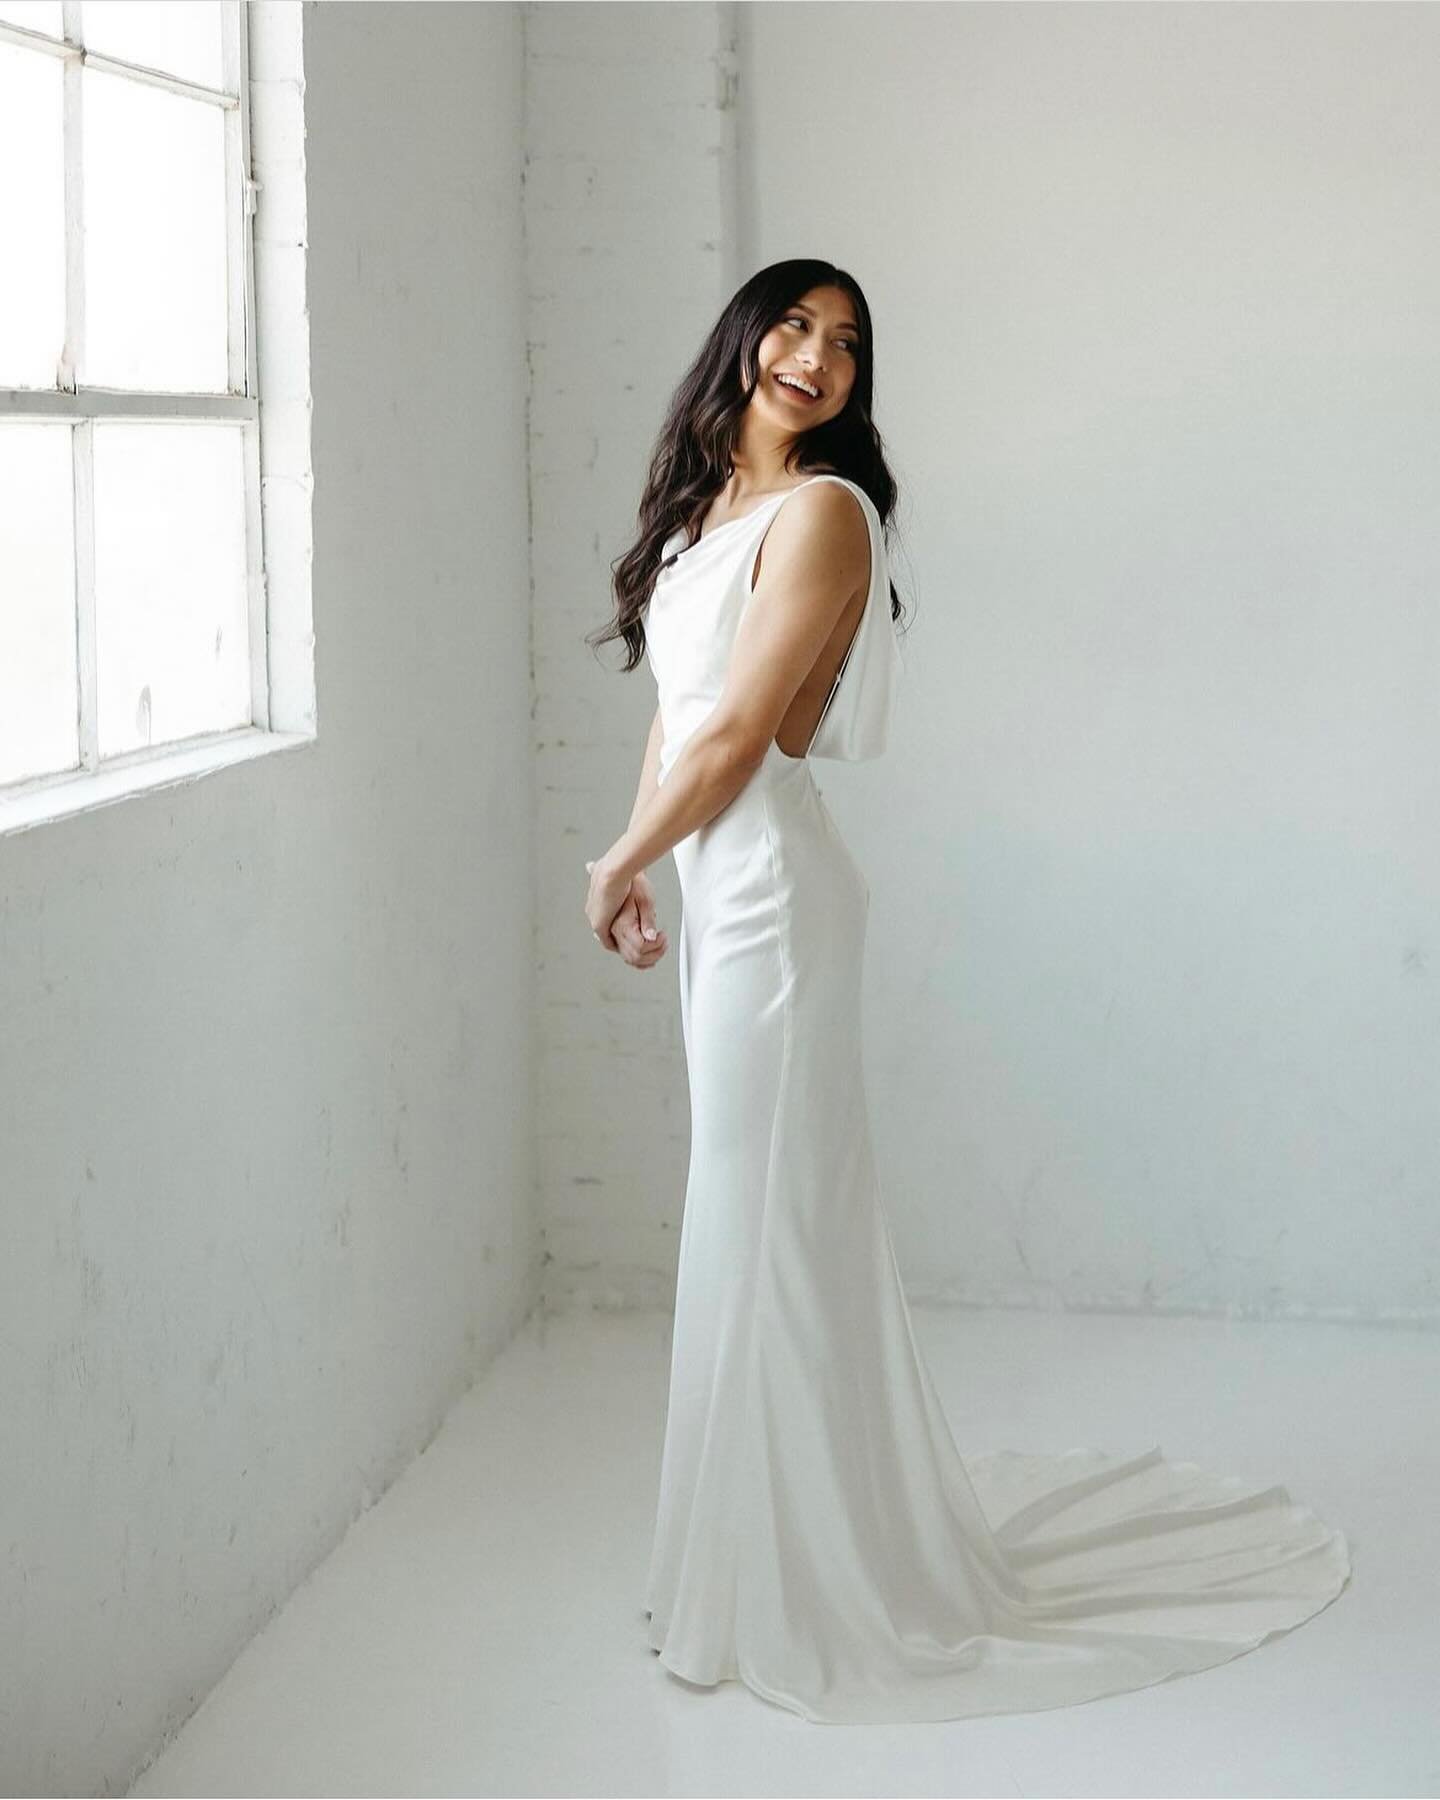 Silk day dreams 🕊️ #AGbride Brittany in #agHarriet 
⠀⠀⠀⠀⠀⠀⠀⠀⠀
photo: @chloe_huls
stockist: @lovelybridephoenix @lovelybride
#AGbride @brittany_yee